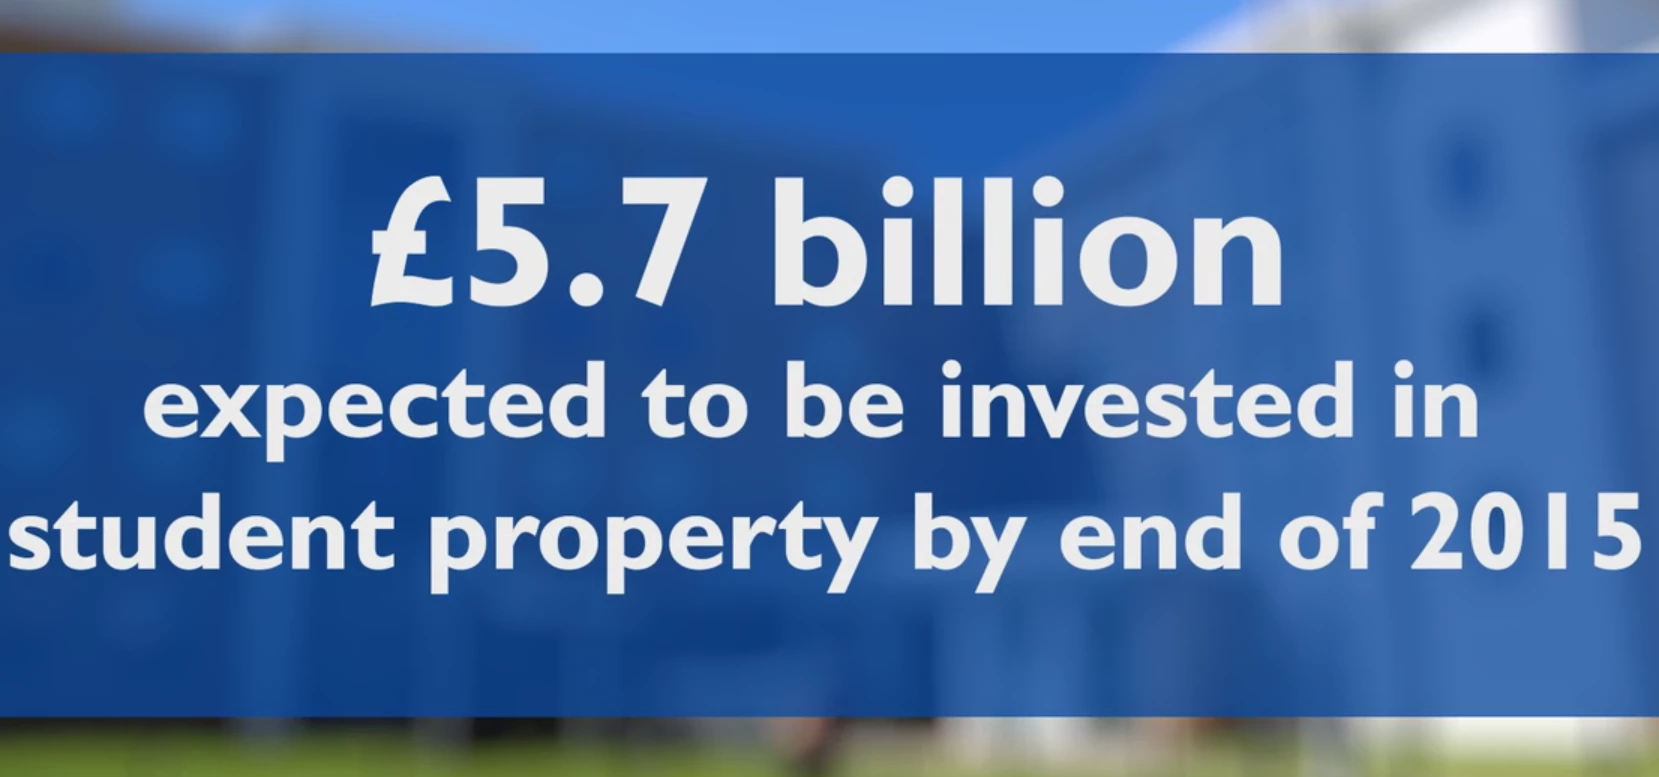  £5.7 billion was expected to be invested in student property in 2015.